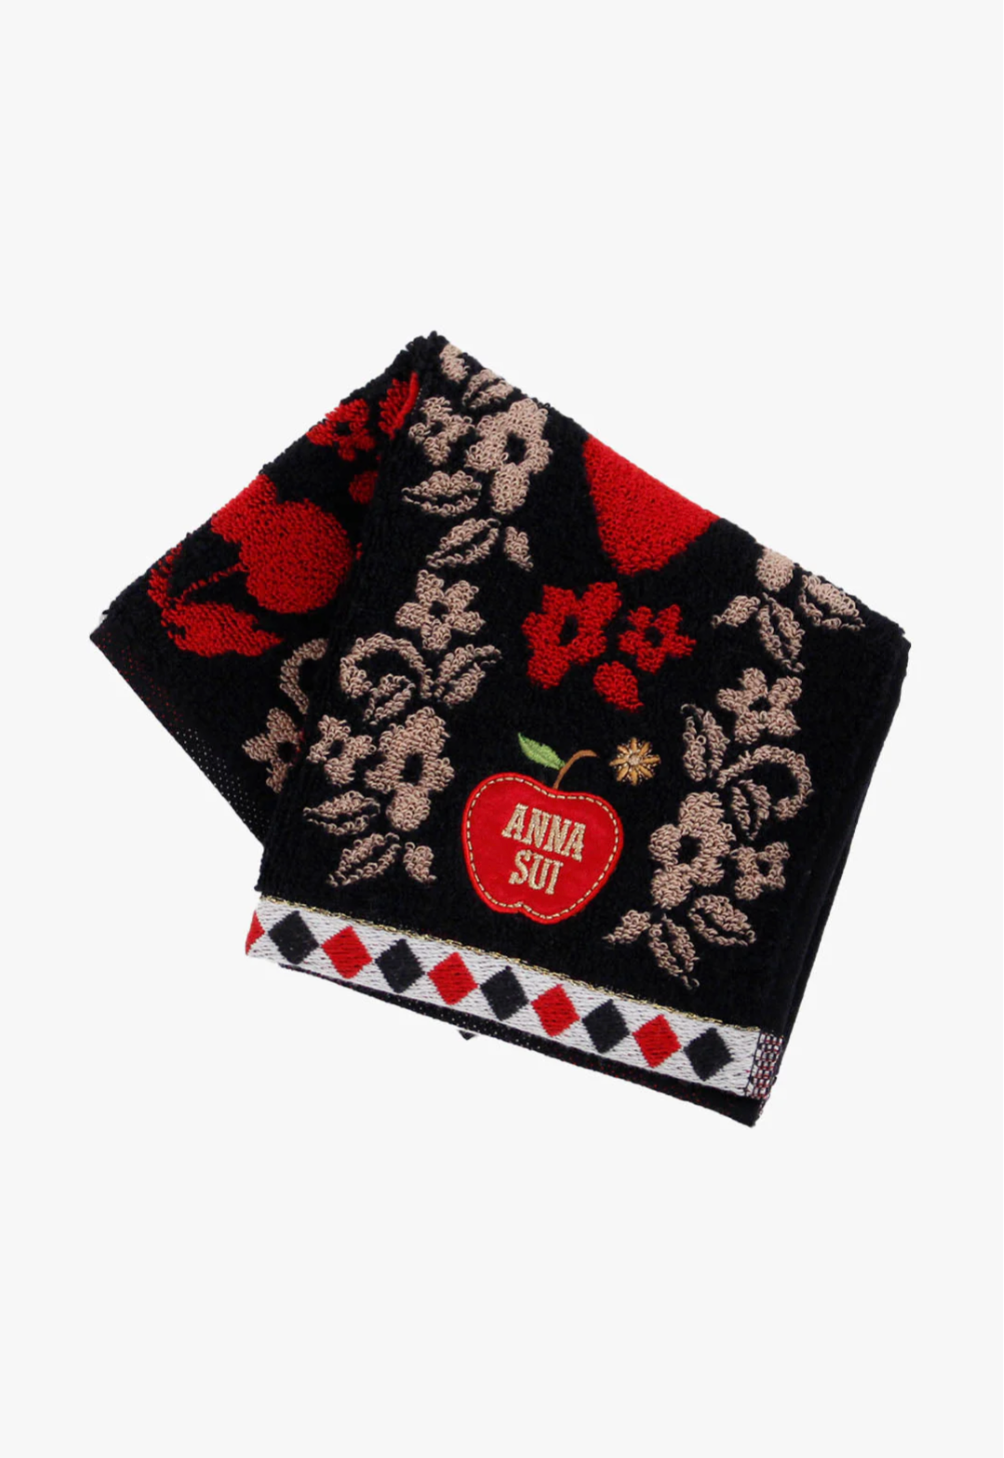 Fruits and Flowers Washcloth